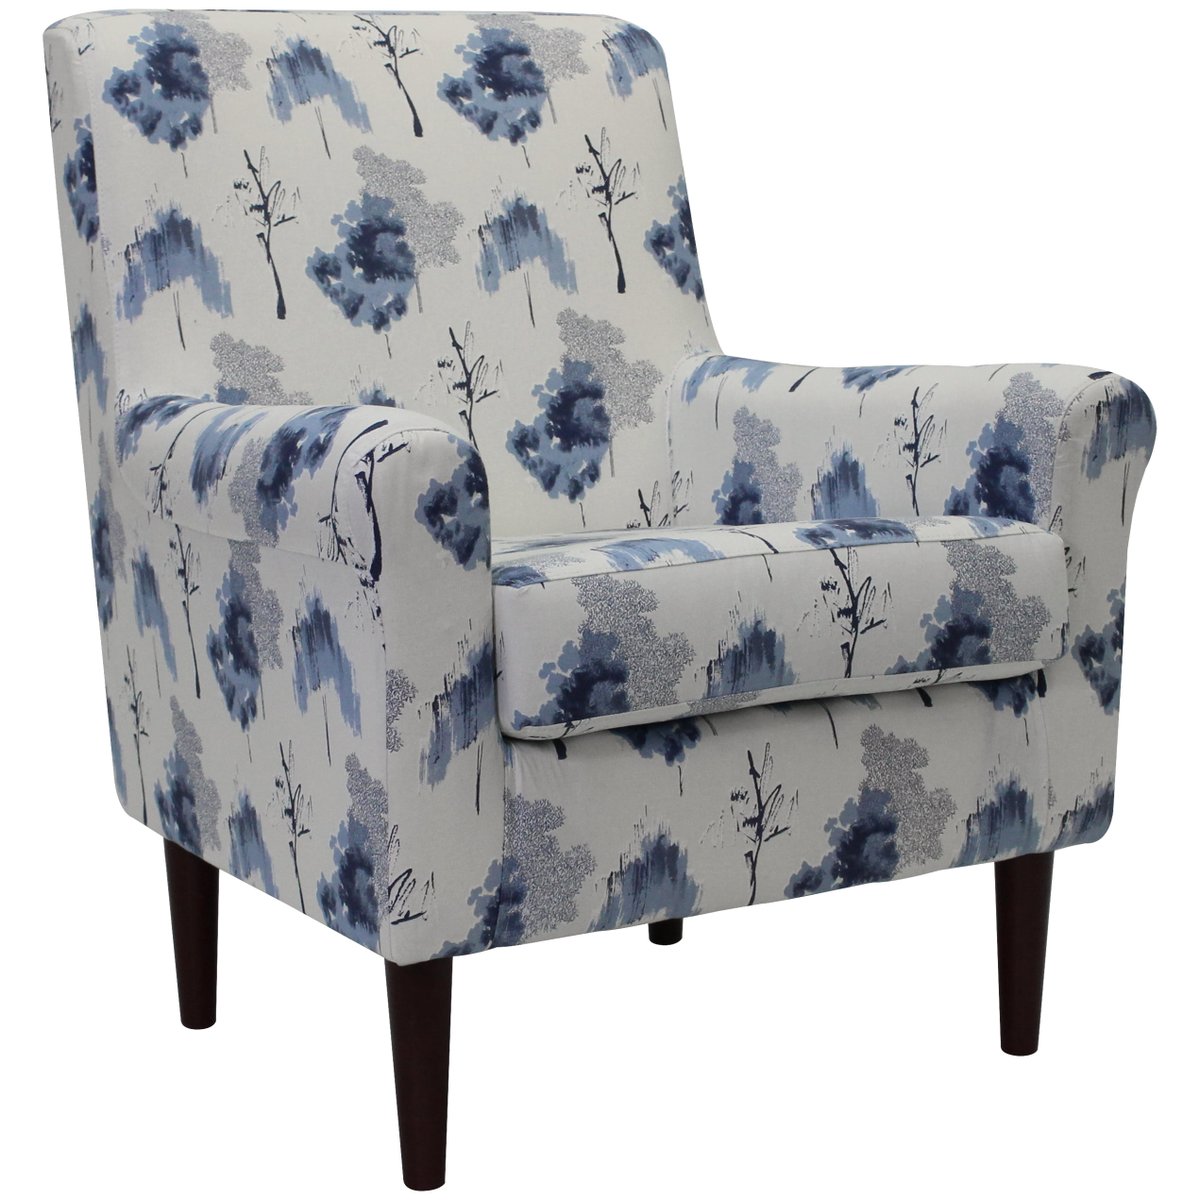 Check out the full details of the Mainstays Raelynn Lounge Chair, Blue  👉🏽👉🏽 thecomfortcorner.jbachbrands.com/products/mains…

#homefurniture #furniture #homedecor #interiordesign #luxuryfurniture #homeofficefurniture #livingroomfurniture #diningroomfurniture #bedroomfurniture #classicfurniture